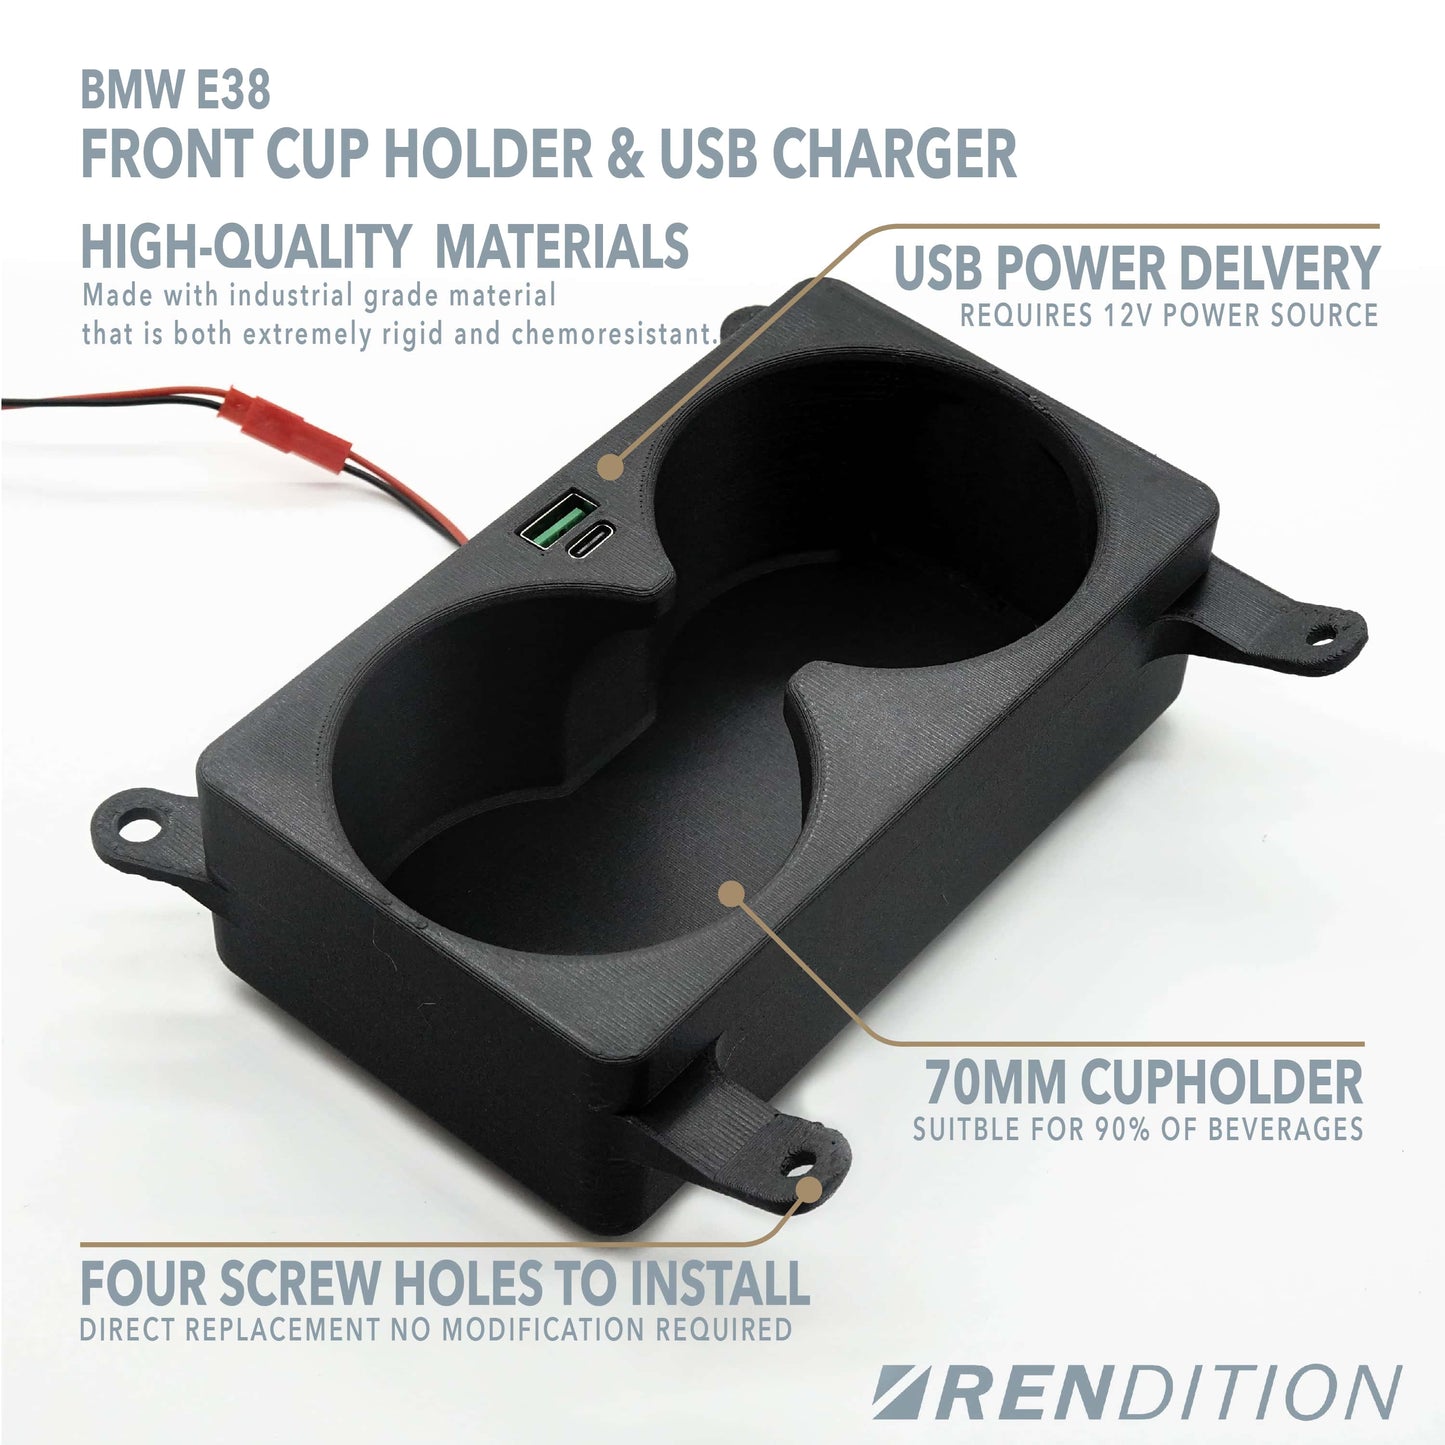 BMW E38 FRONT CUP HOLDER & USB CHARGER